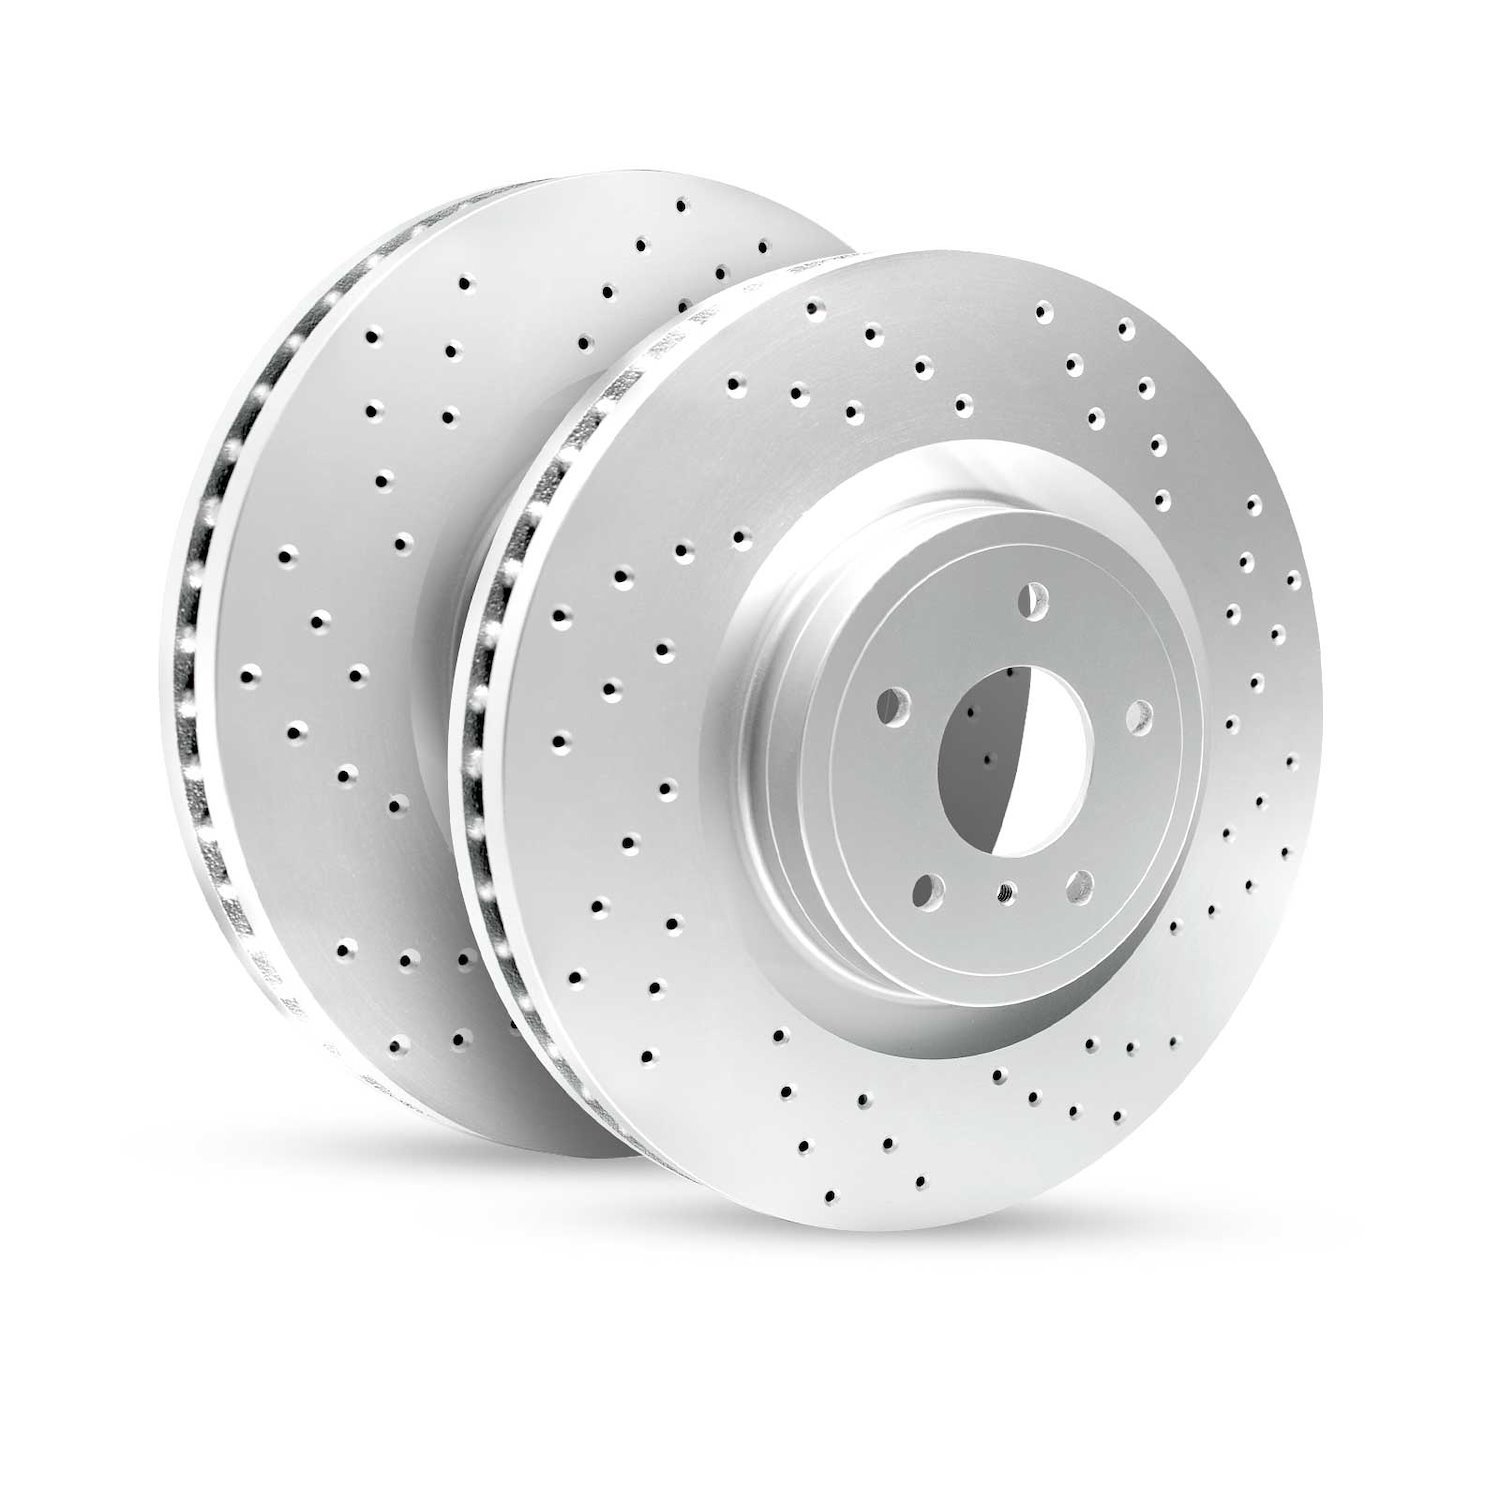 GEO-Carbon Drilled/Slotted Rotors, 2005-2021 Fits Multiple Makes/Models, Position: Rear